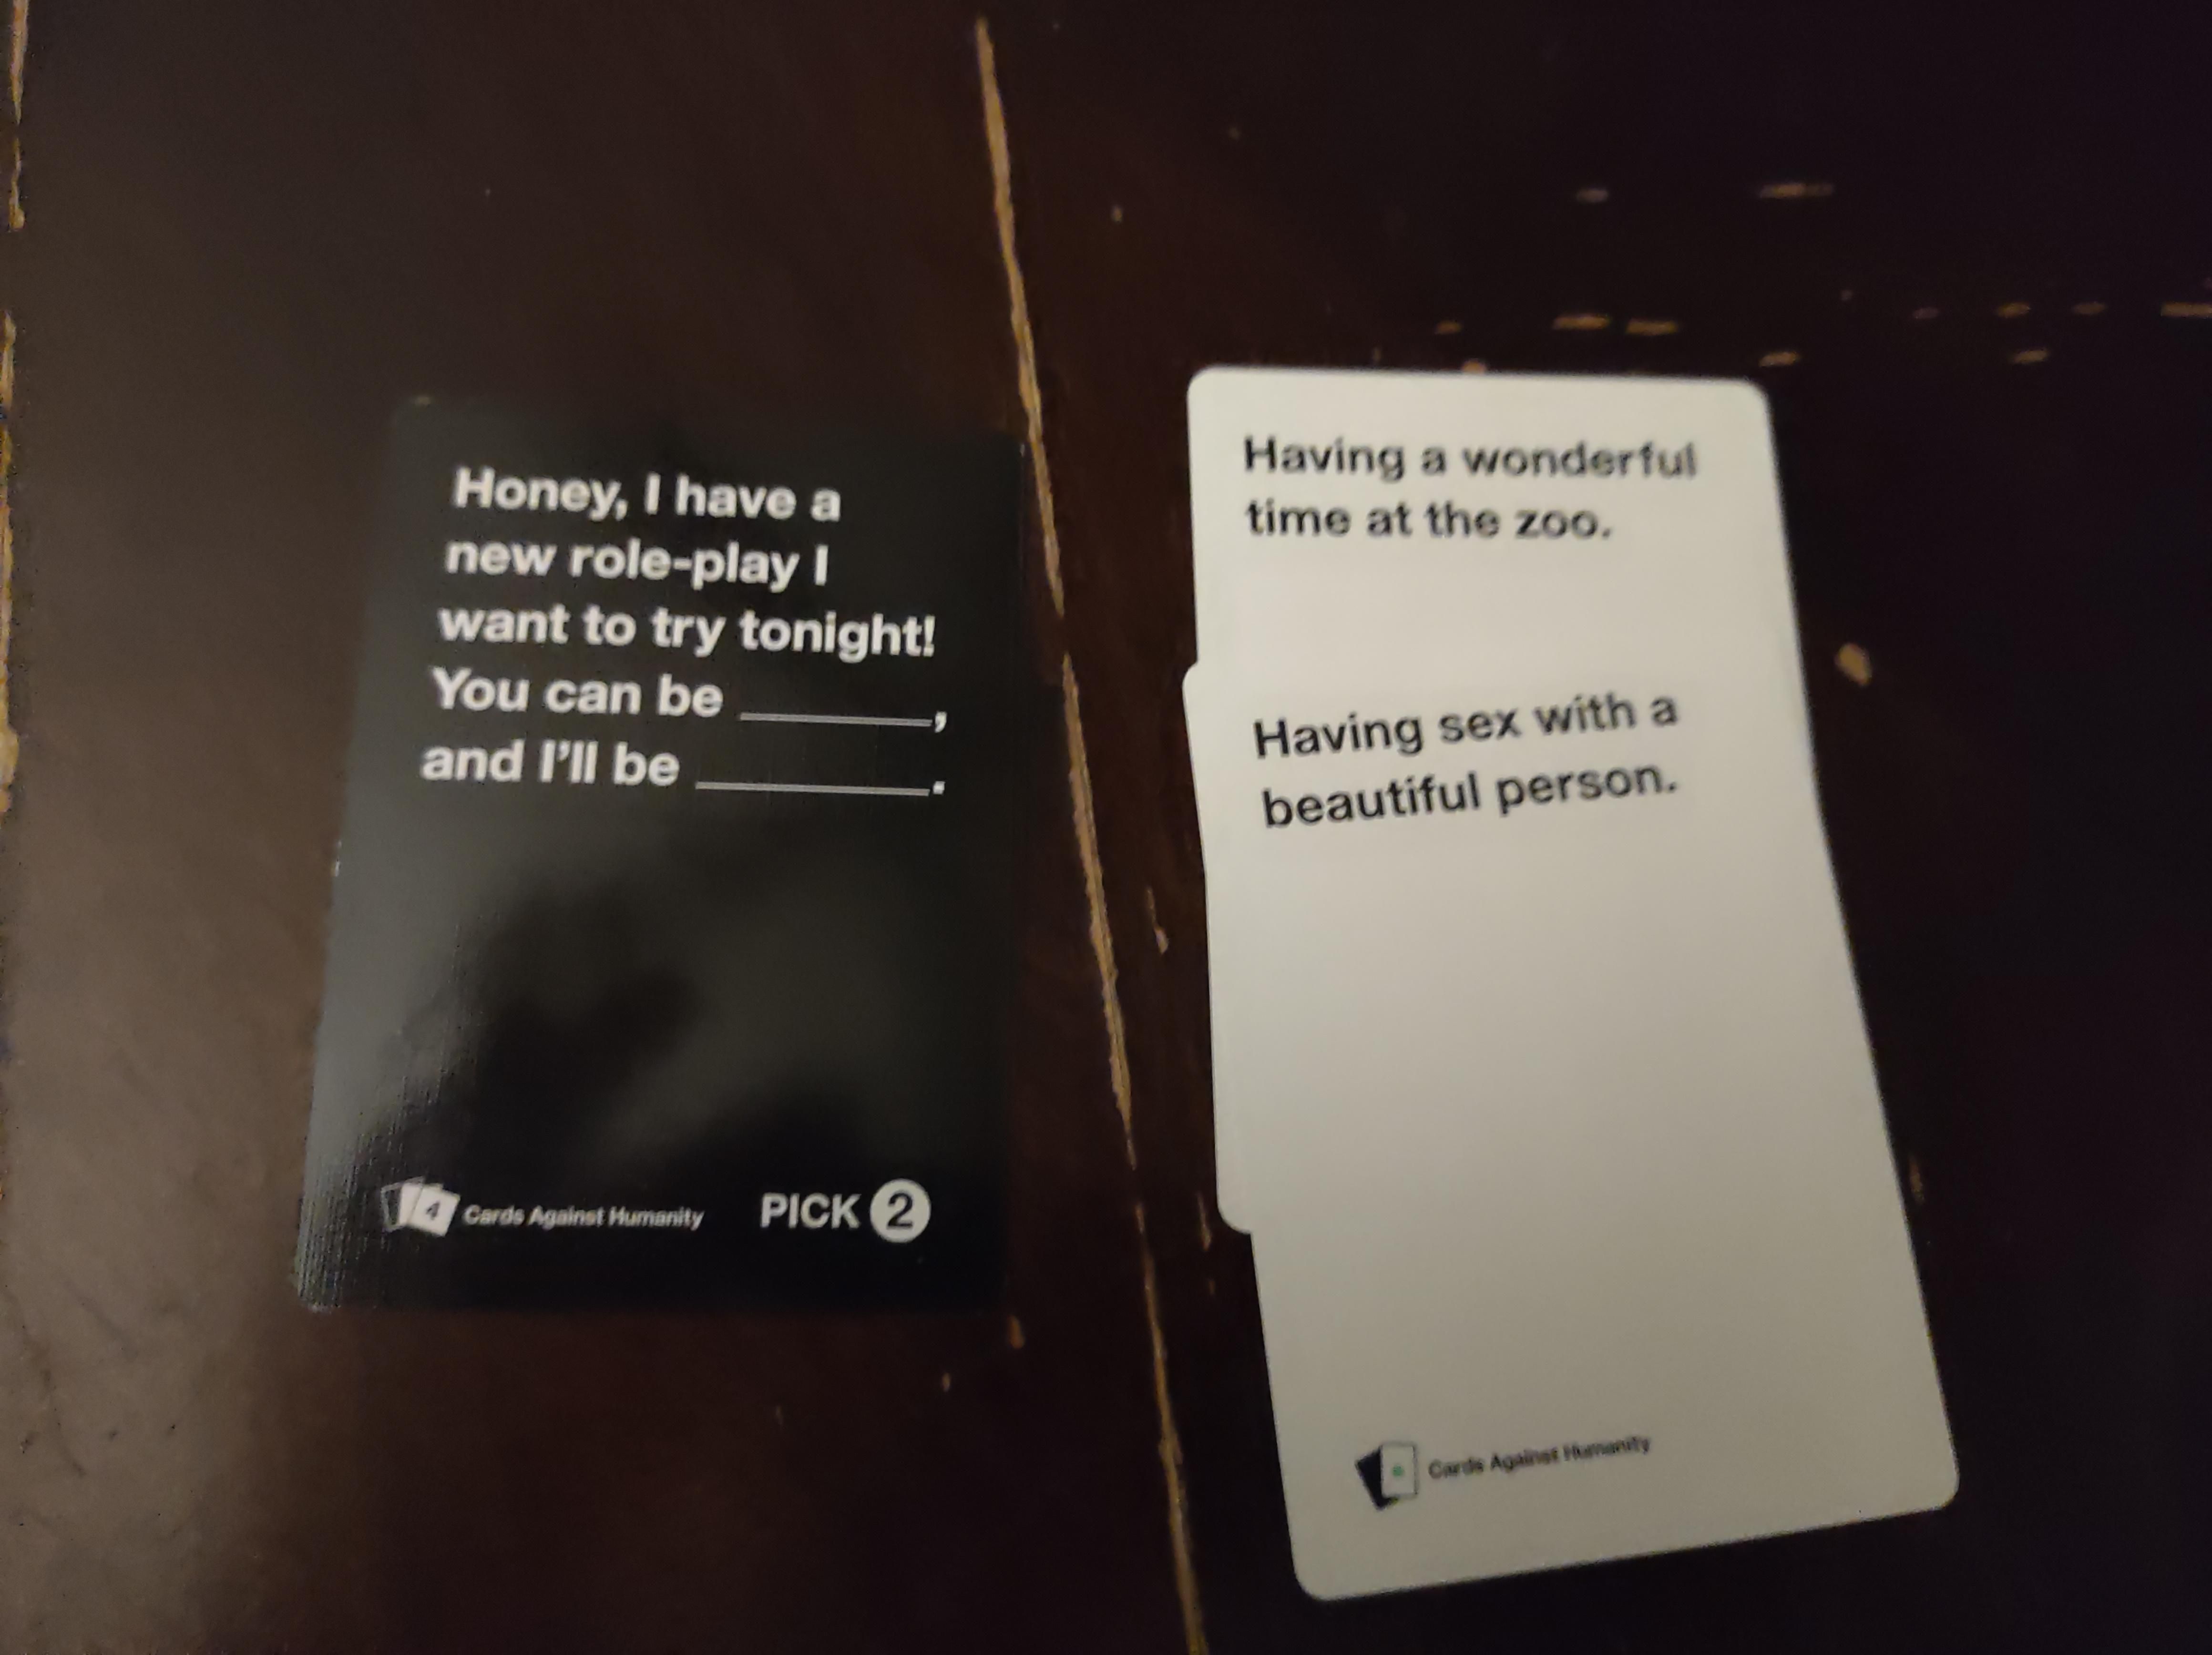 Playing cards against humanity with a couples friend, this was exceptionally harsh.